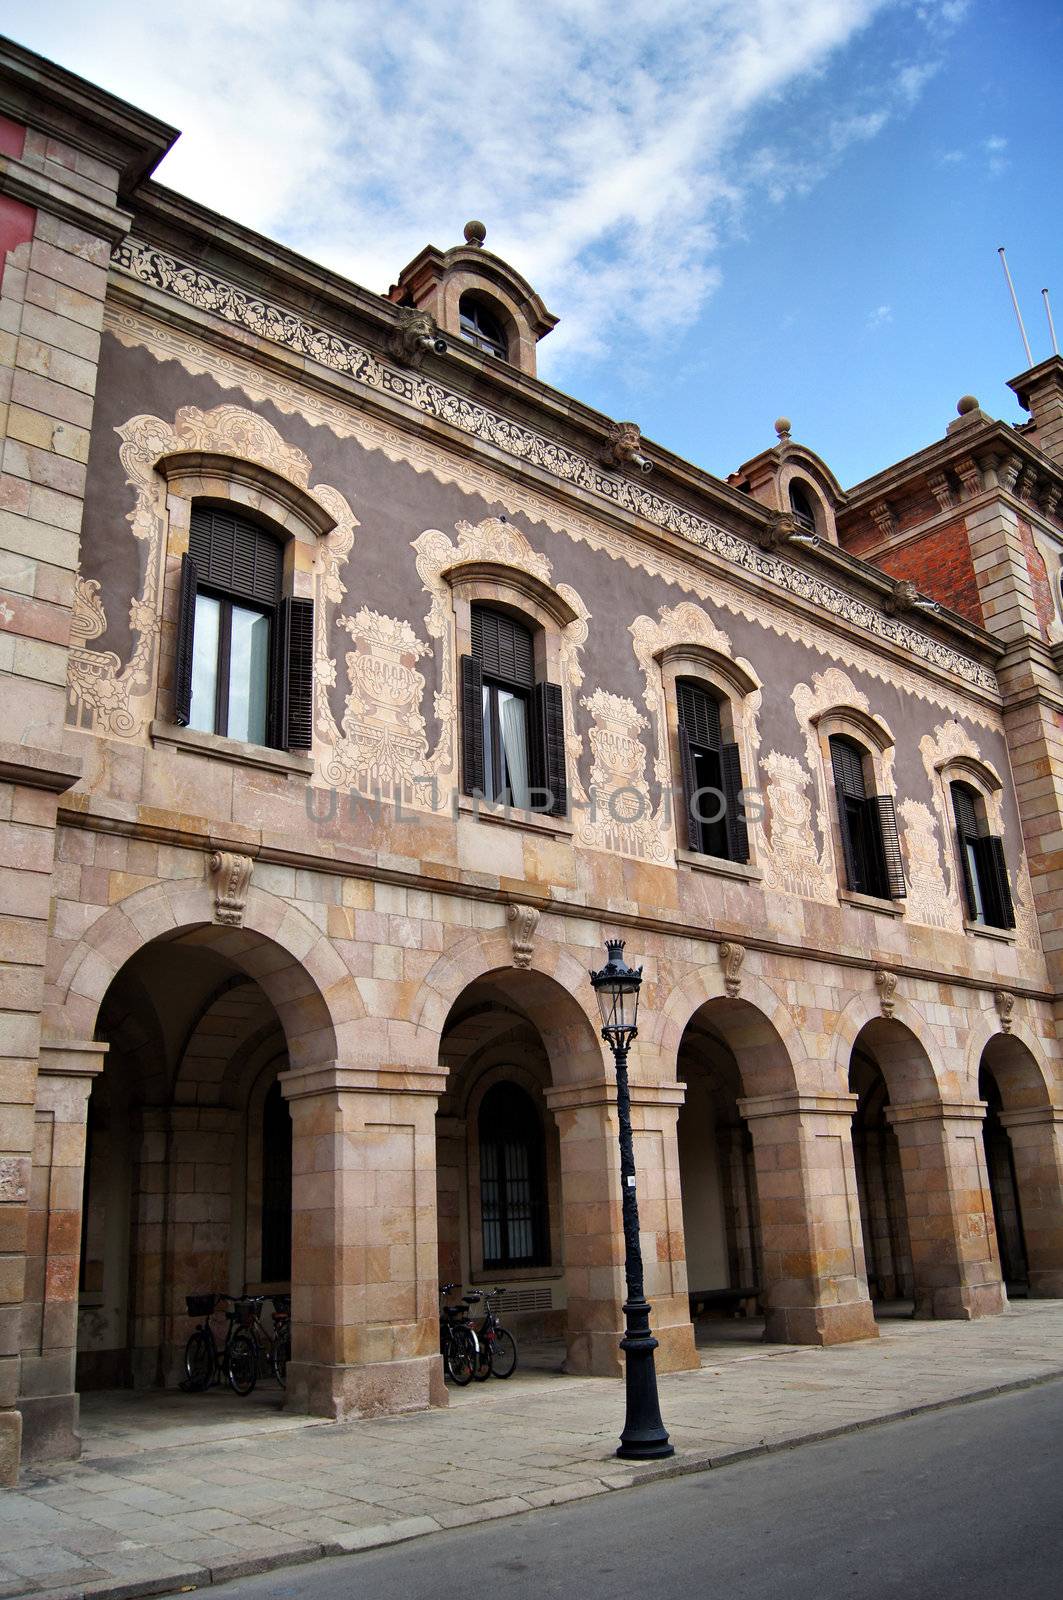 Building of Parliament of Catalonia in Barcelona, Spain